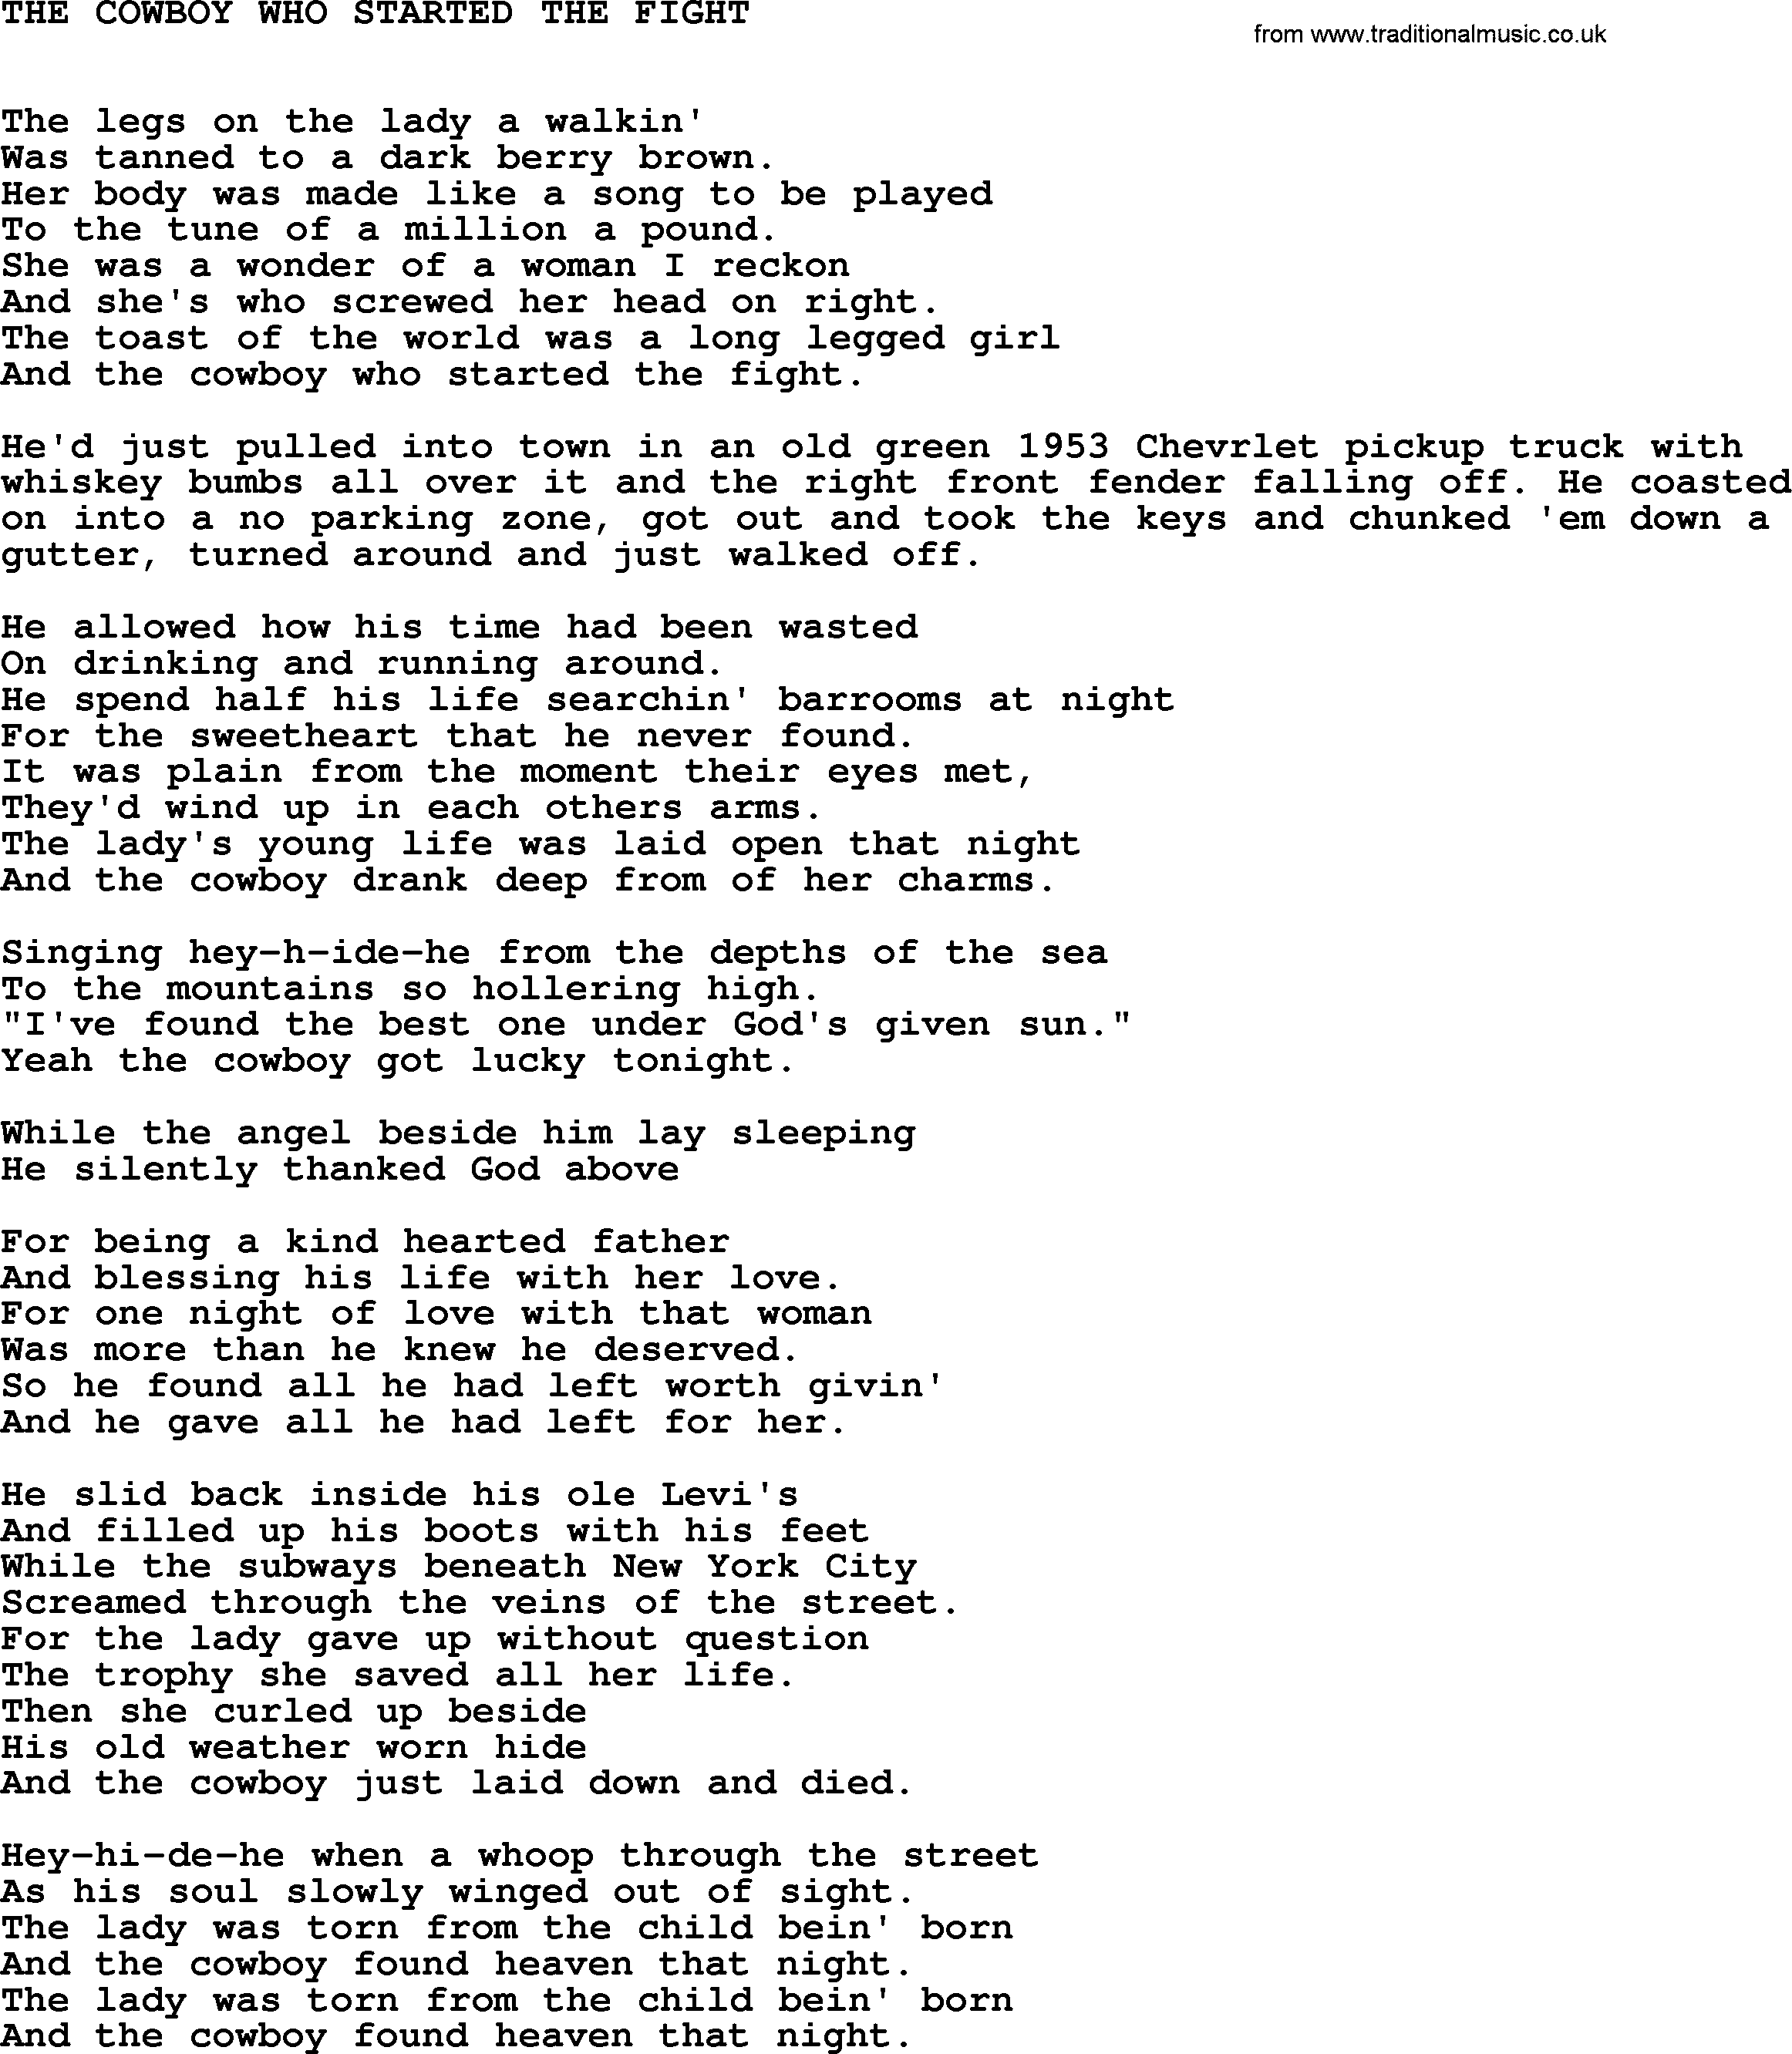 Johnny Cash song The Cowboy Who Started The Fight.txt lyrics